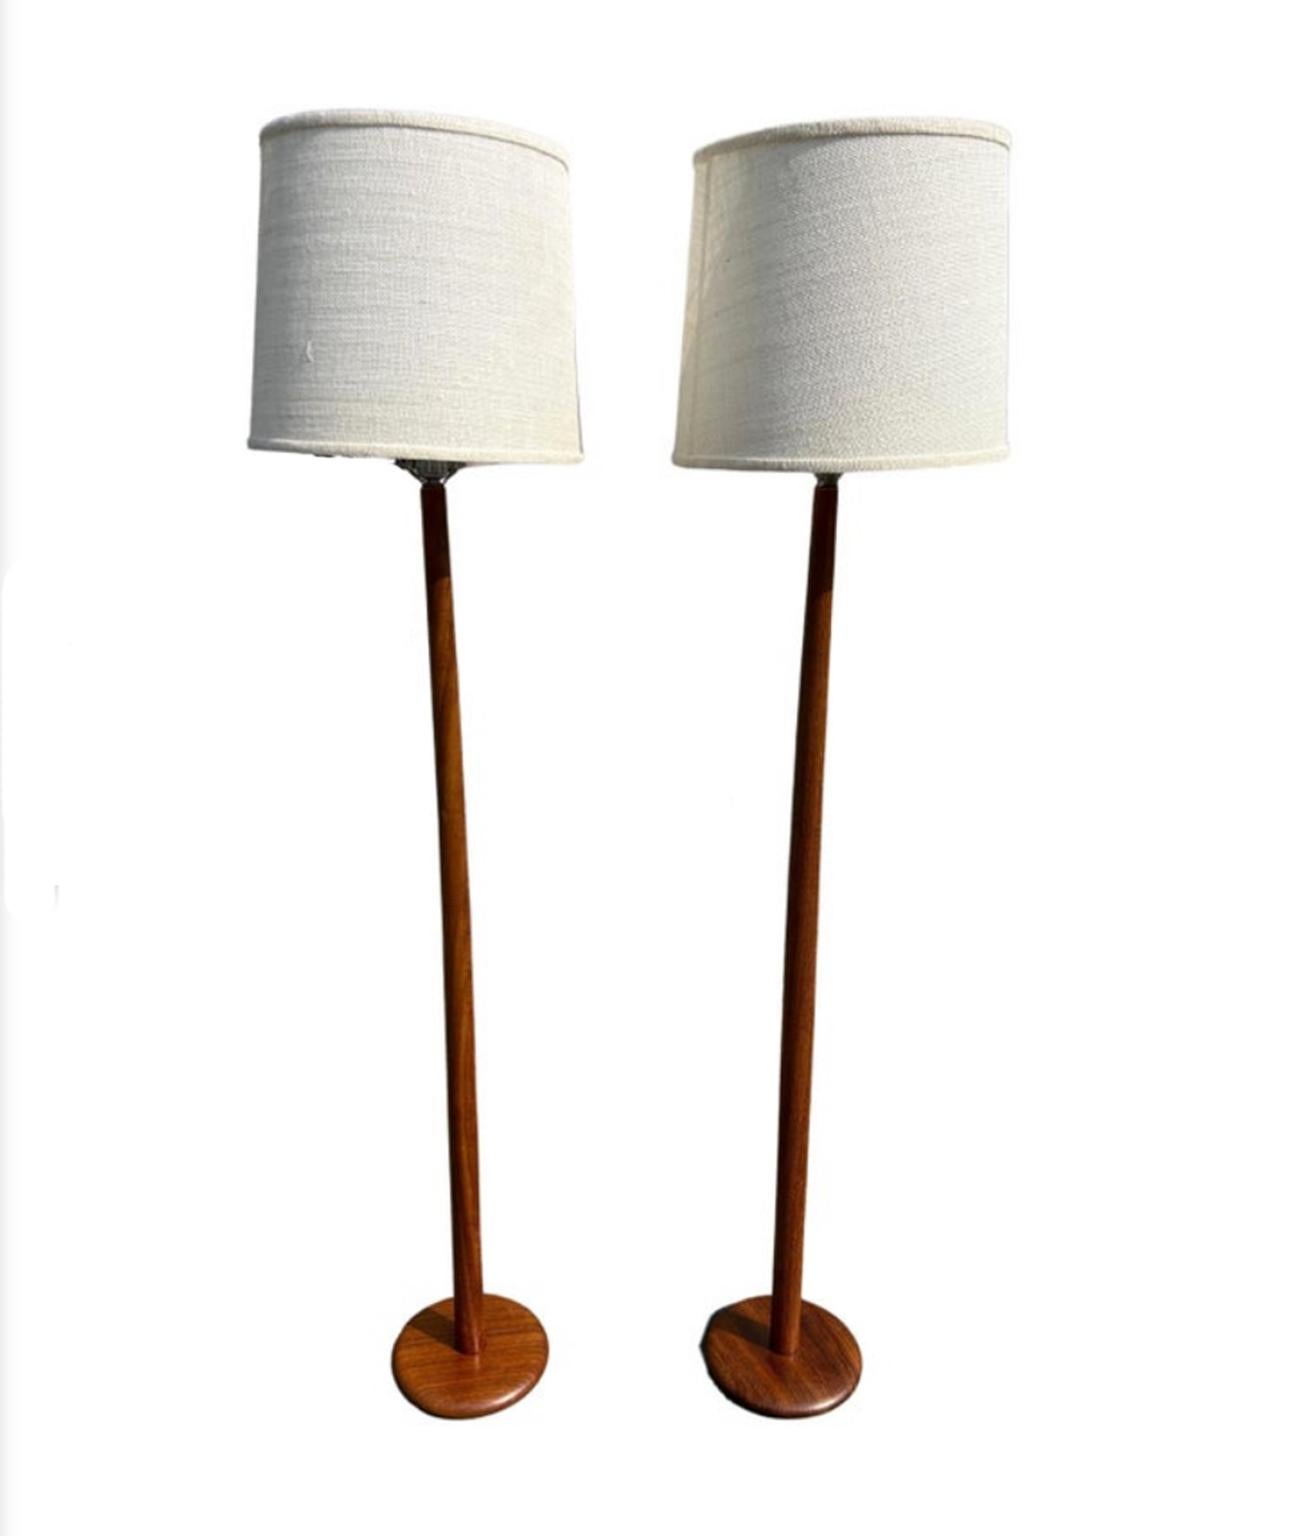 (One) Mid-Century Modern Danish Solid Teak Floor Lamp Lights, Denmark In Good Condition For Sale In BROOKLYN, NY